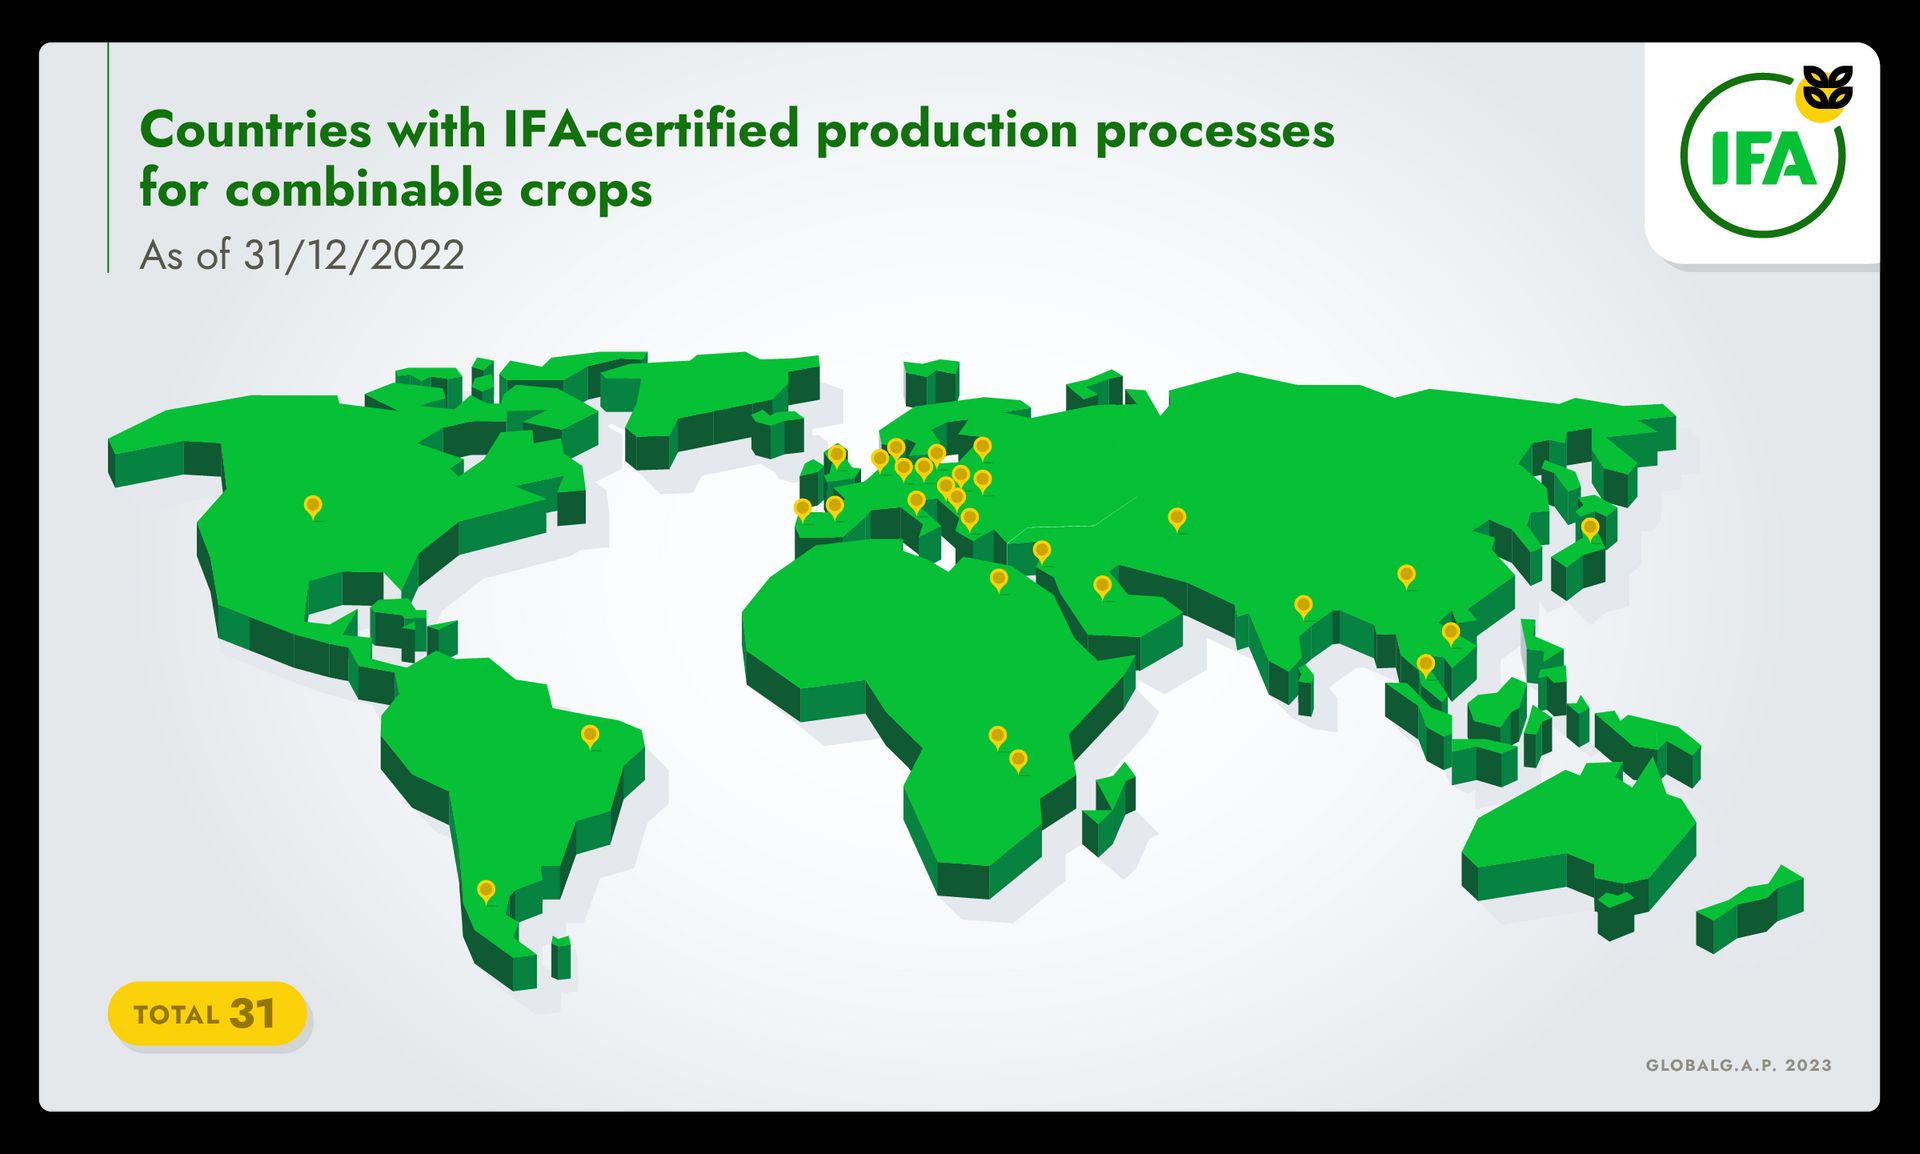 Infographic of a world map identifying countries with Integrated Farm Assurance certified production processes for combinable crops